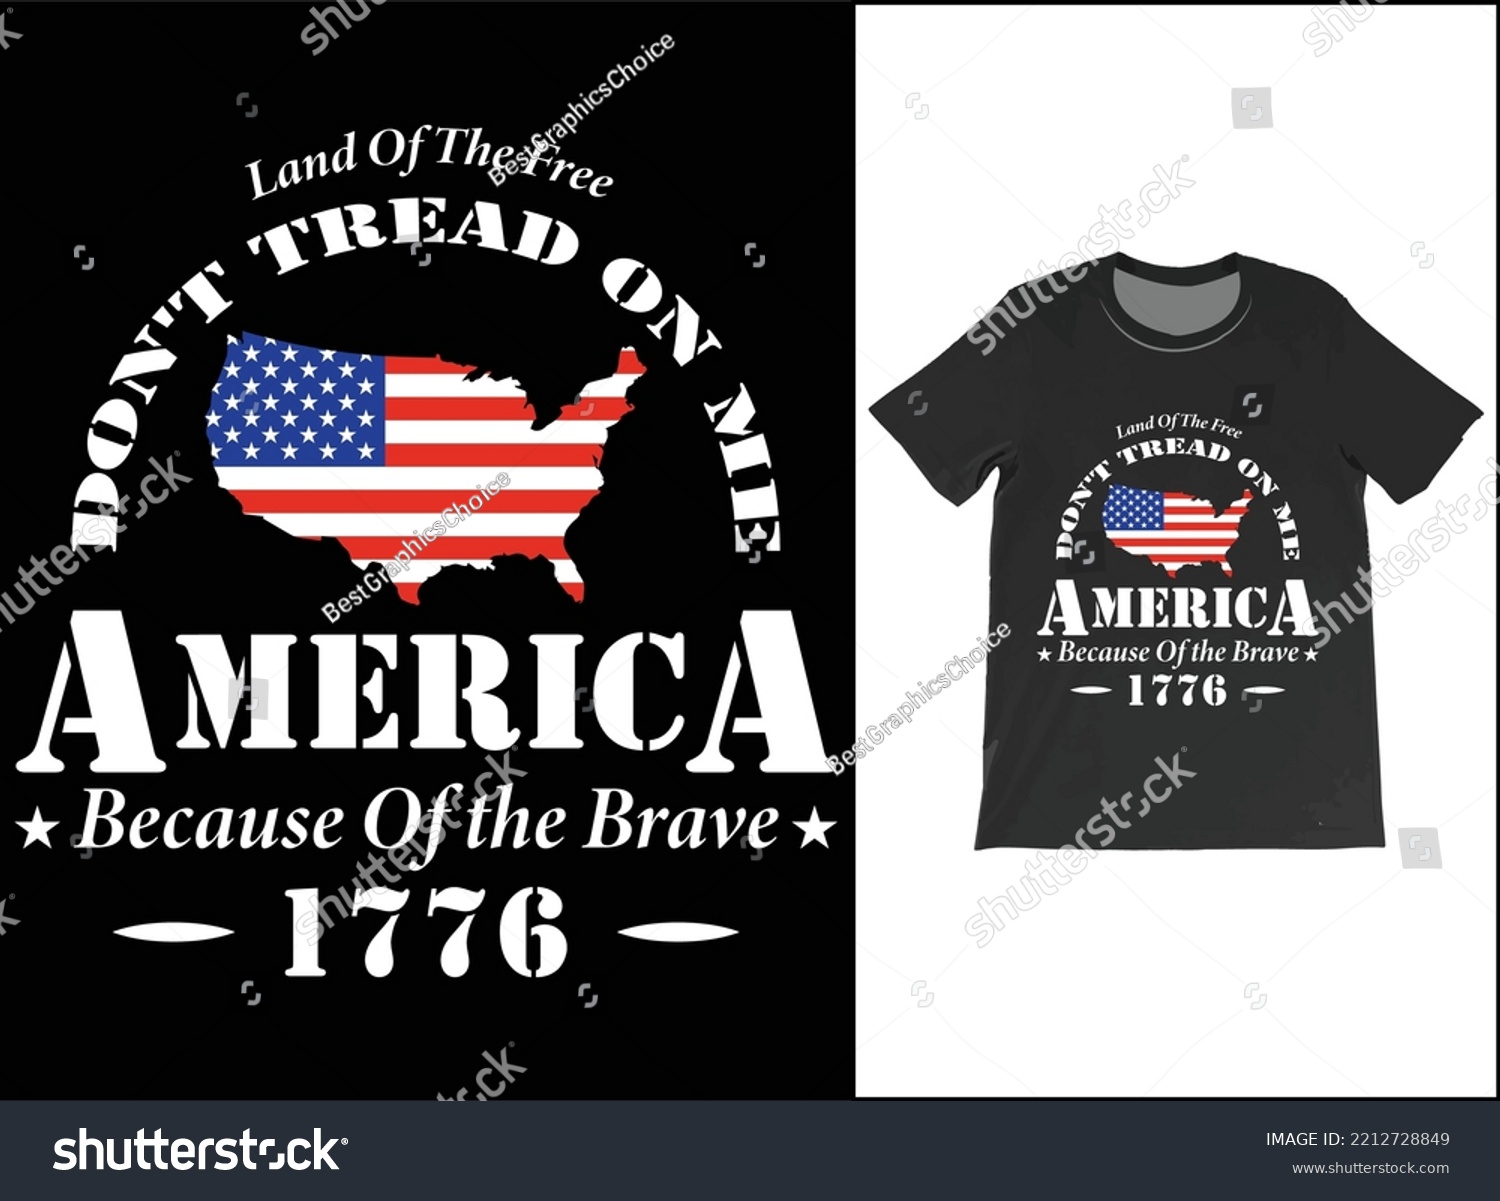 SVG of Land Of The Free Don't Tread On Me America Because Of the Brave 1776, 4th of July Shirt. svg